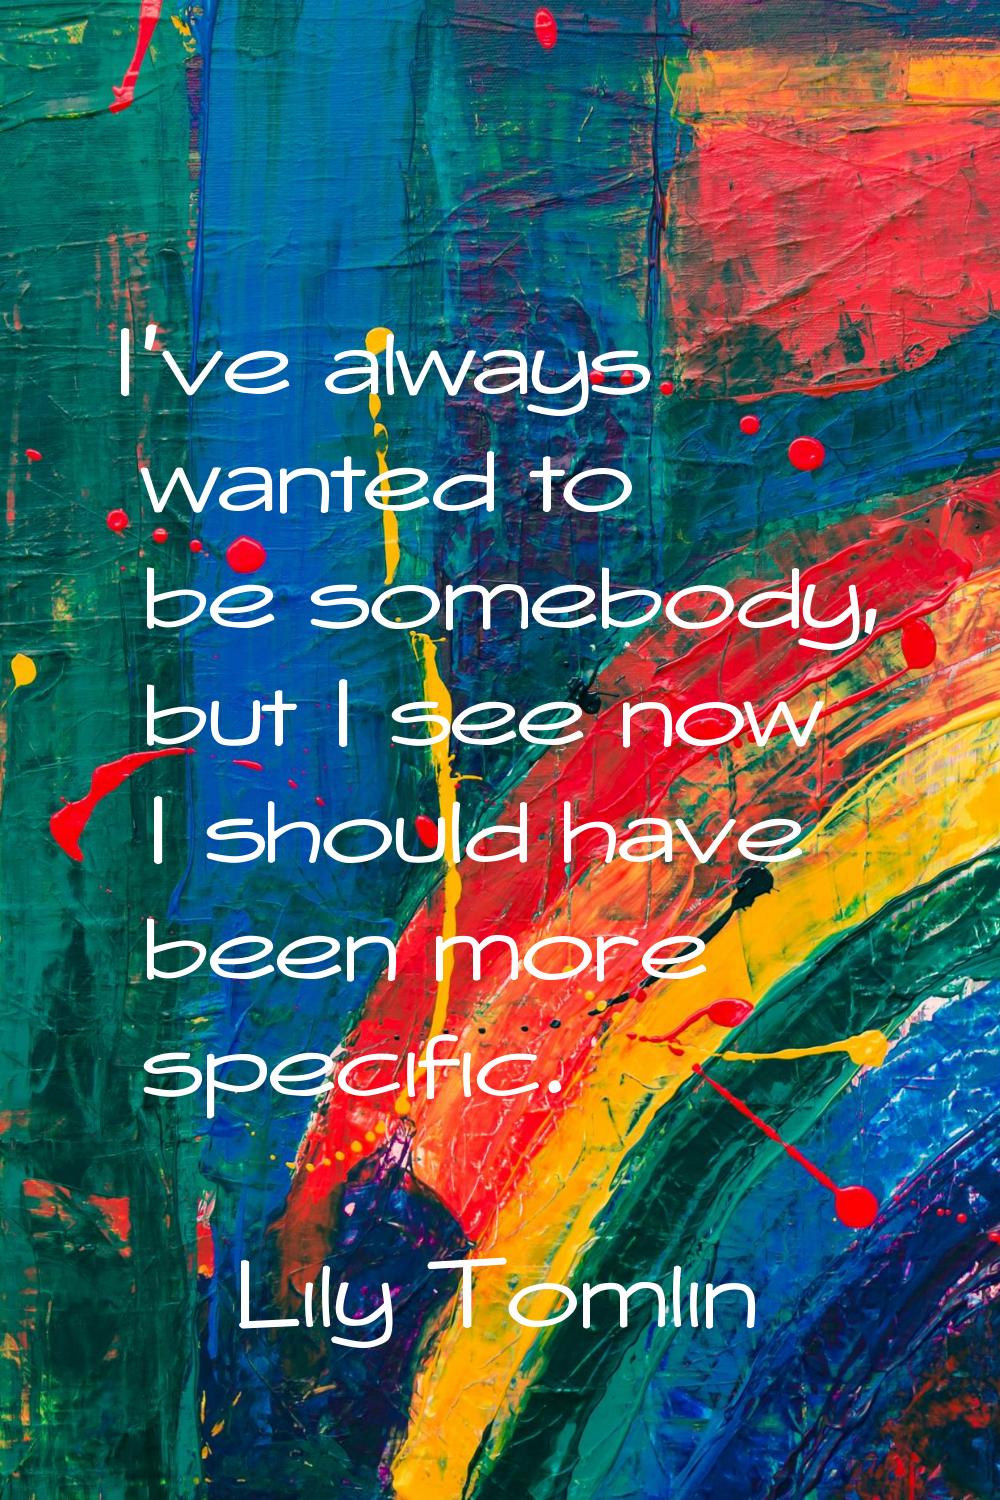 I've always wanted to be somebody, but I see now I should have been more specific.